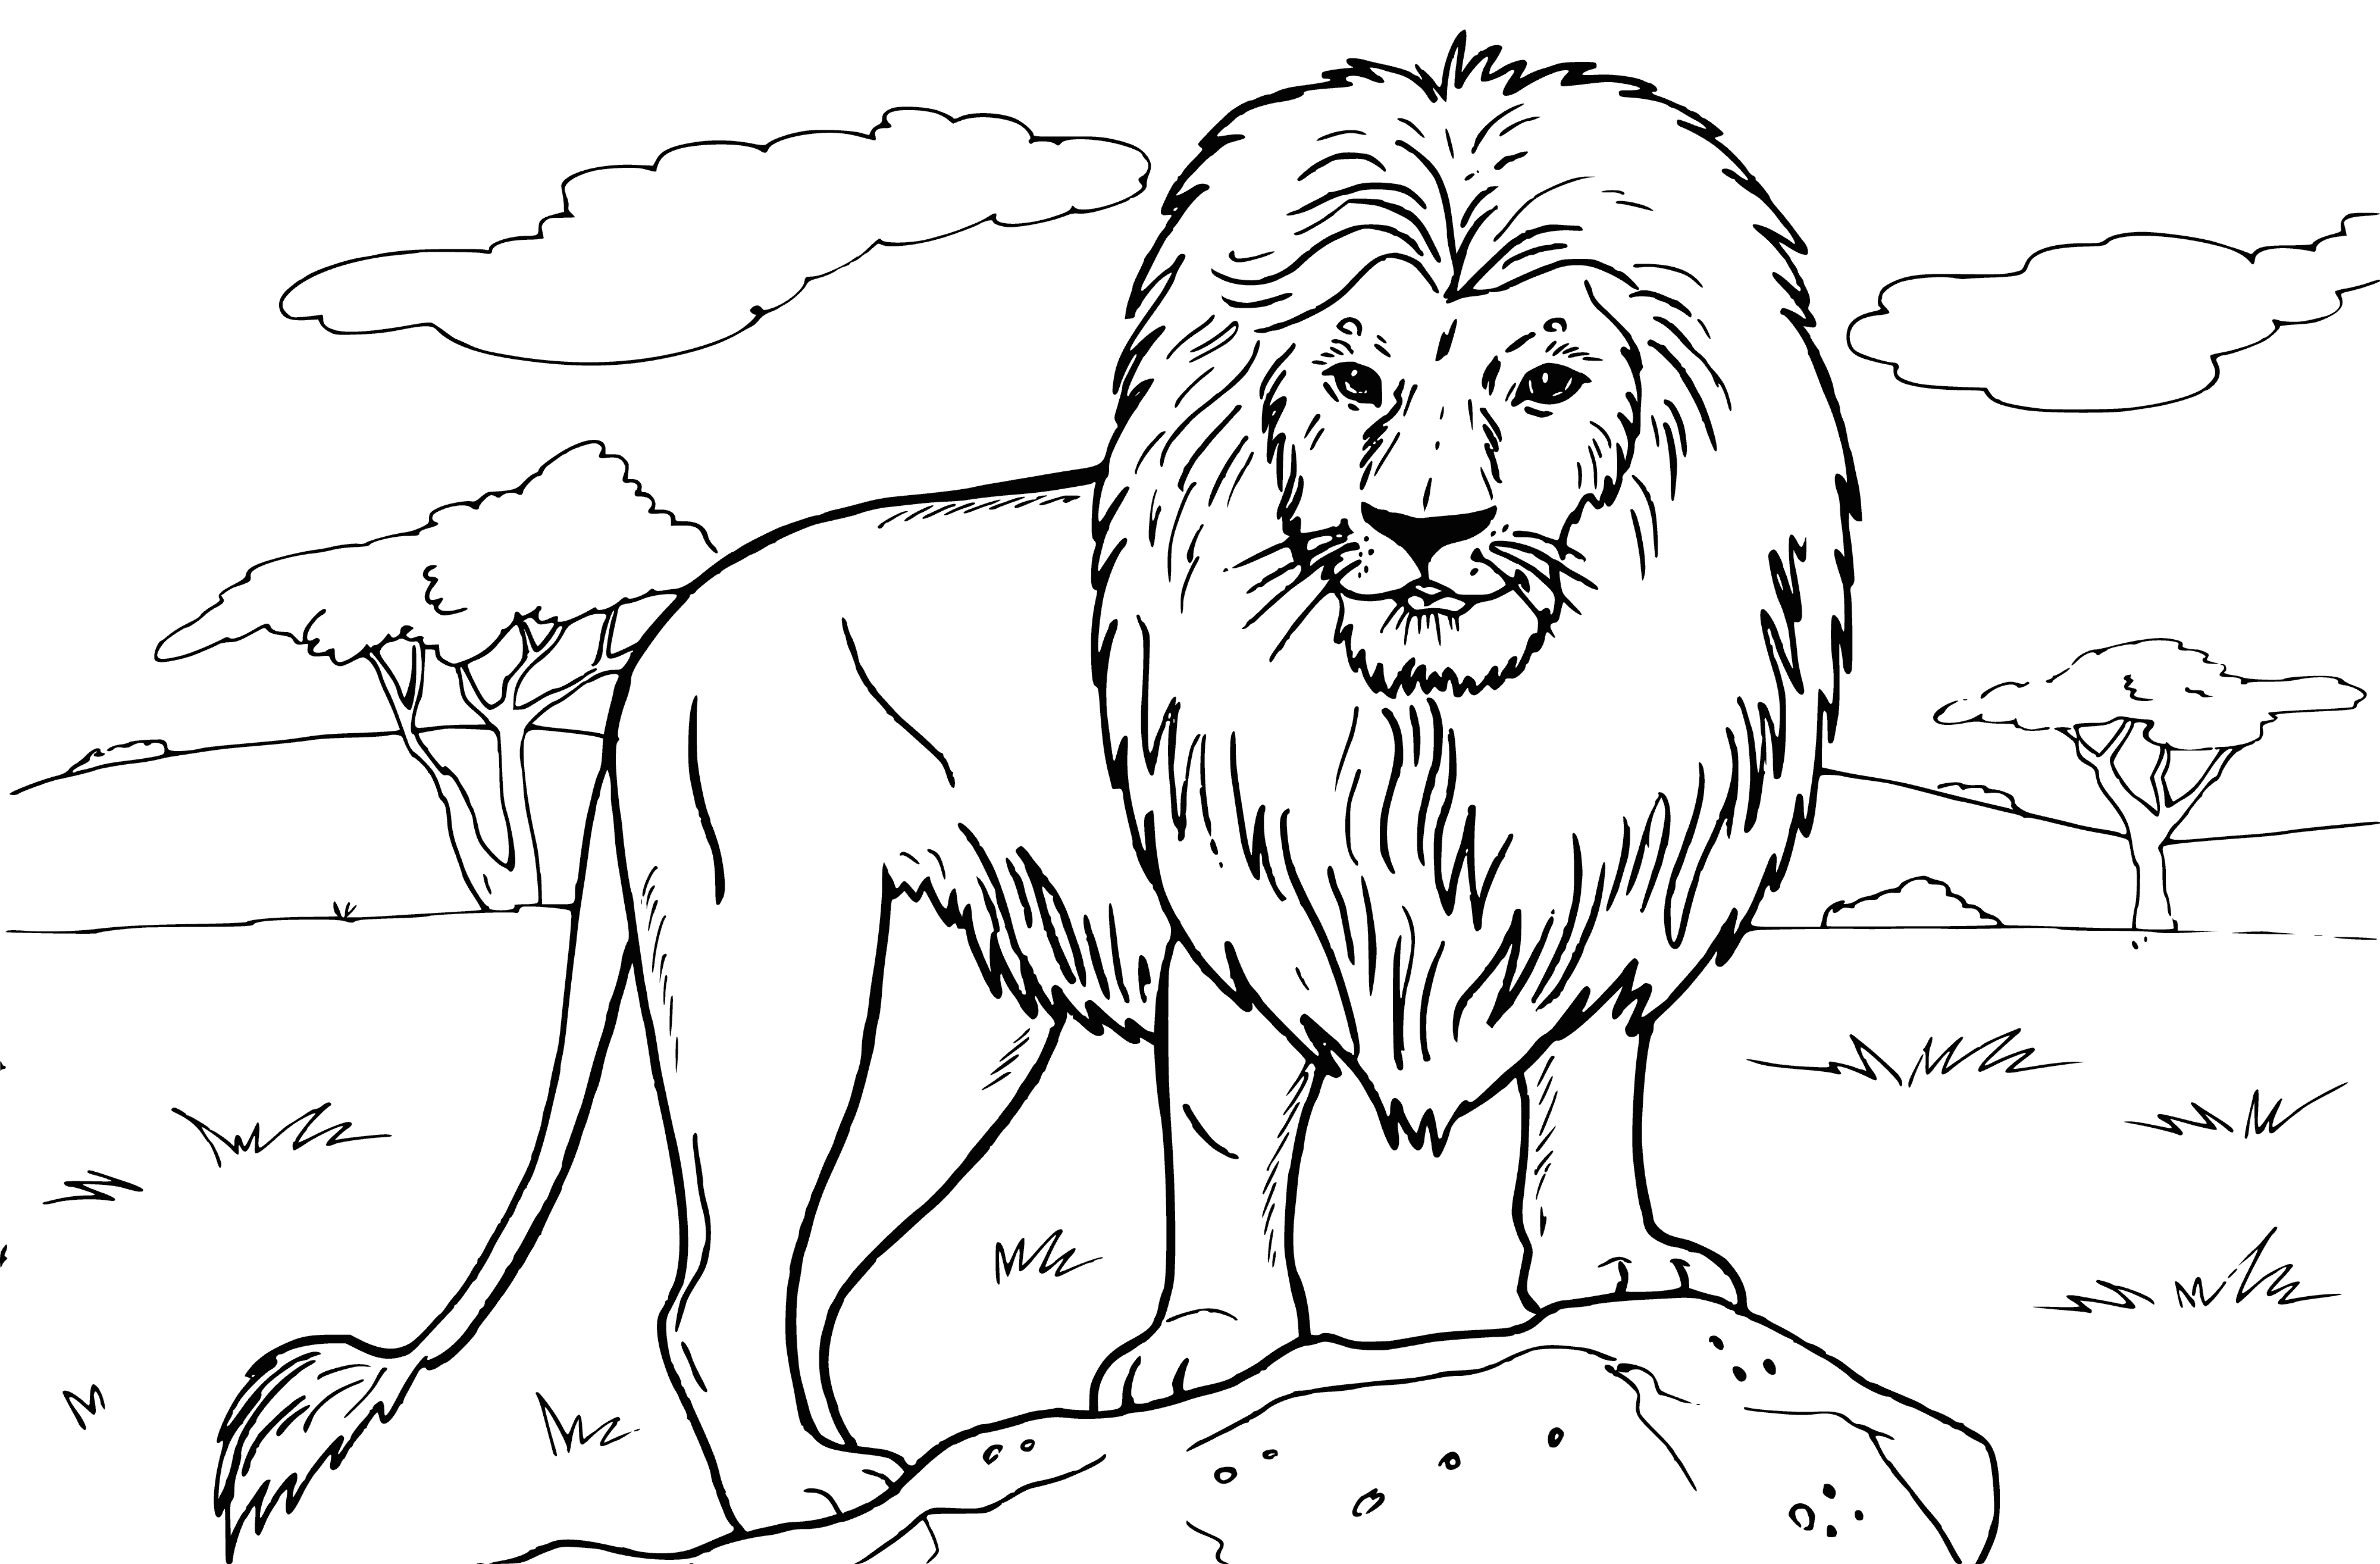 coloring page: Two lions, one standing & one lying down, open-mouthed amidst a forest backdrop. #coloringpage